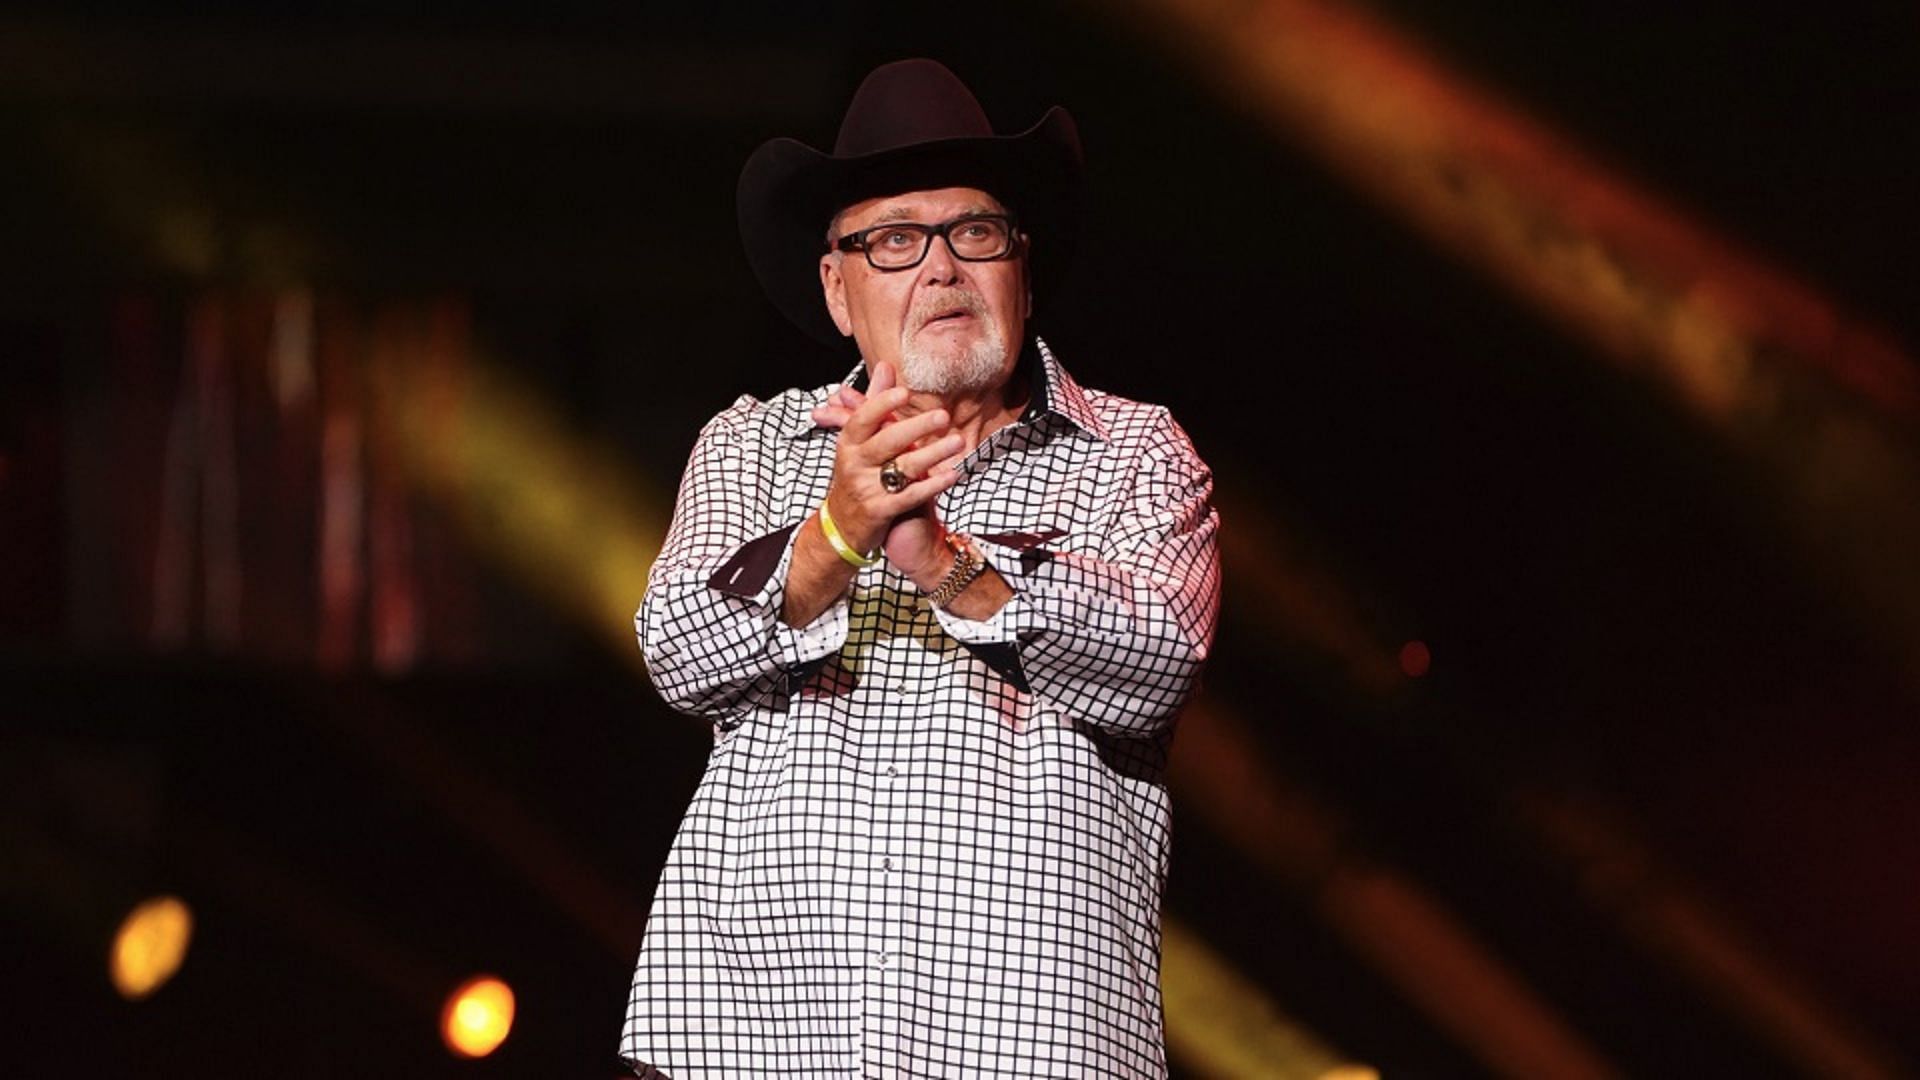 Jim Ross at an AEW event in 2021